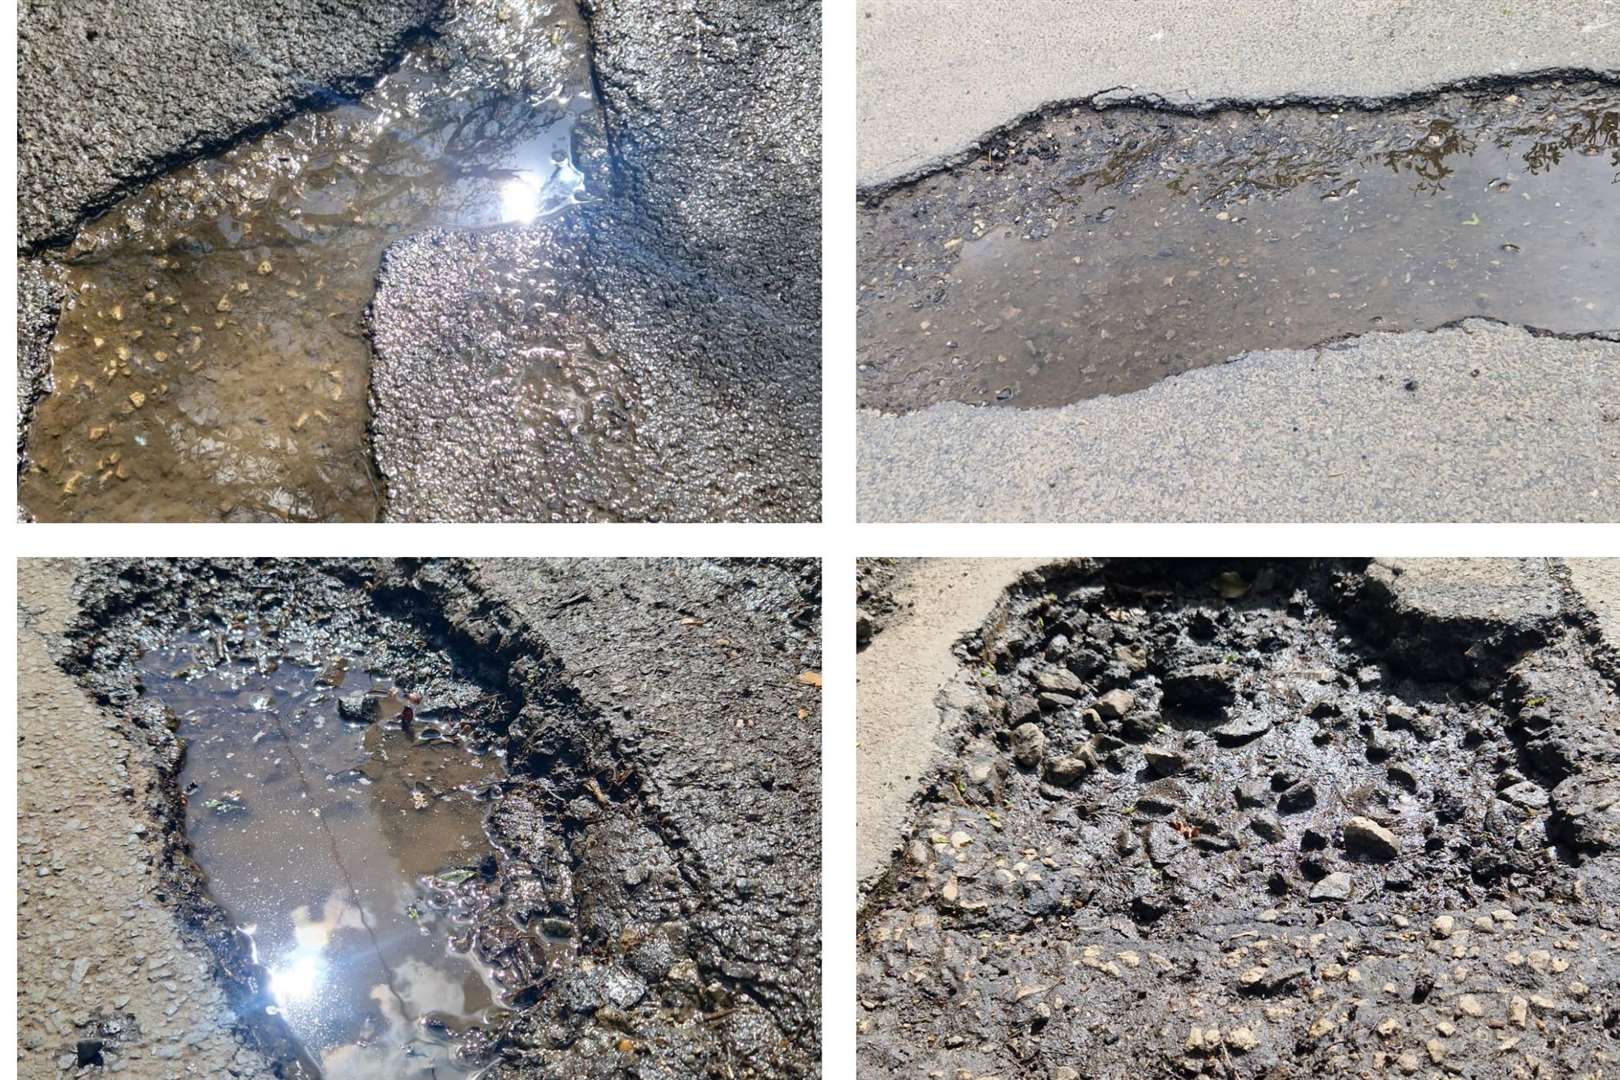 Potholes in Bourne Road, Aldington, which are set to be fixed amid the “pothole blitz”